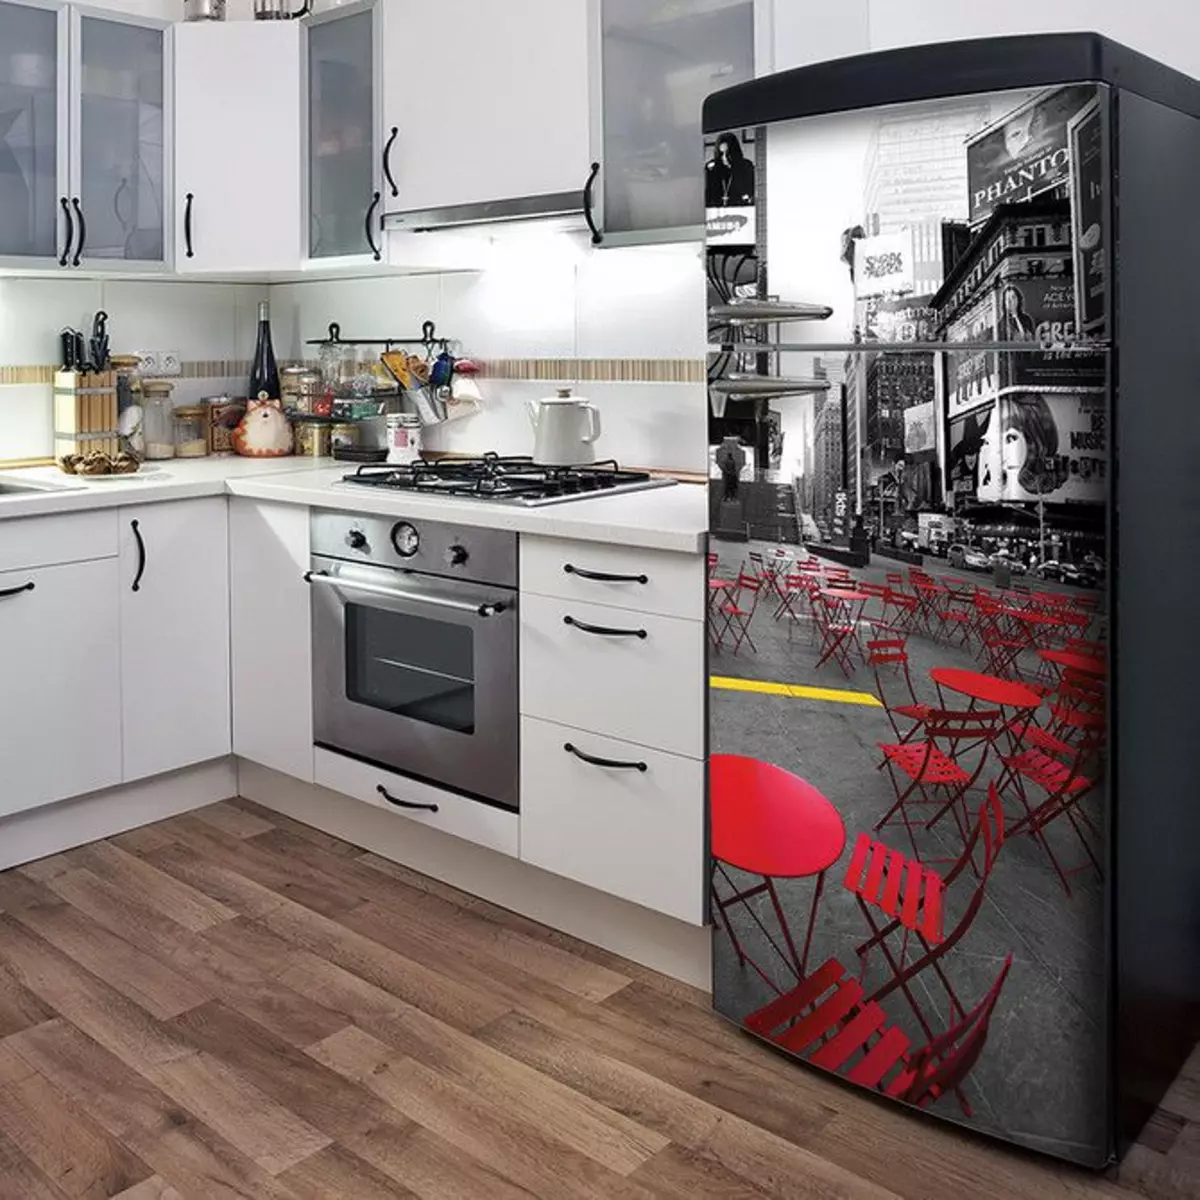 Not only SMEG: 6 ideas with multicolored appliances for kitchen 6947_16